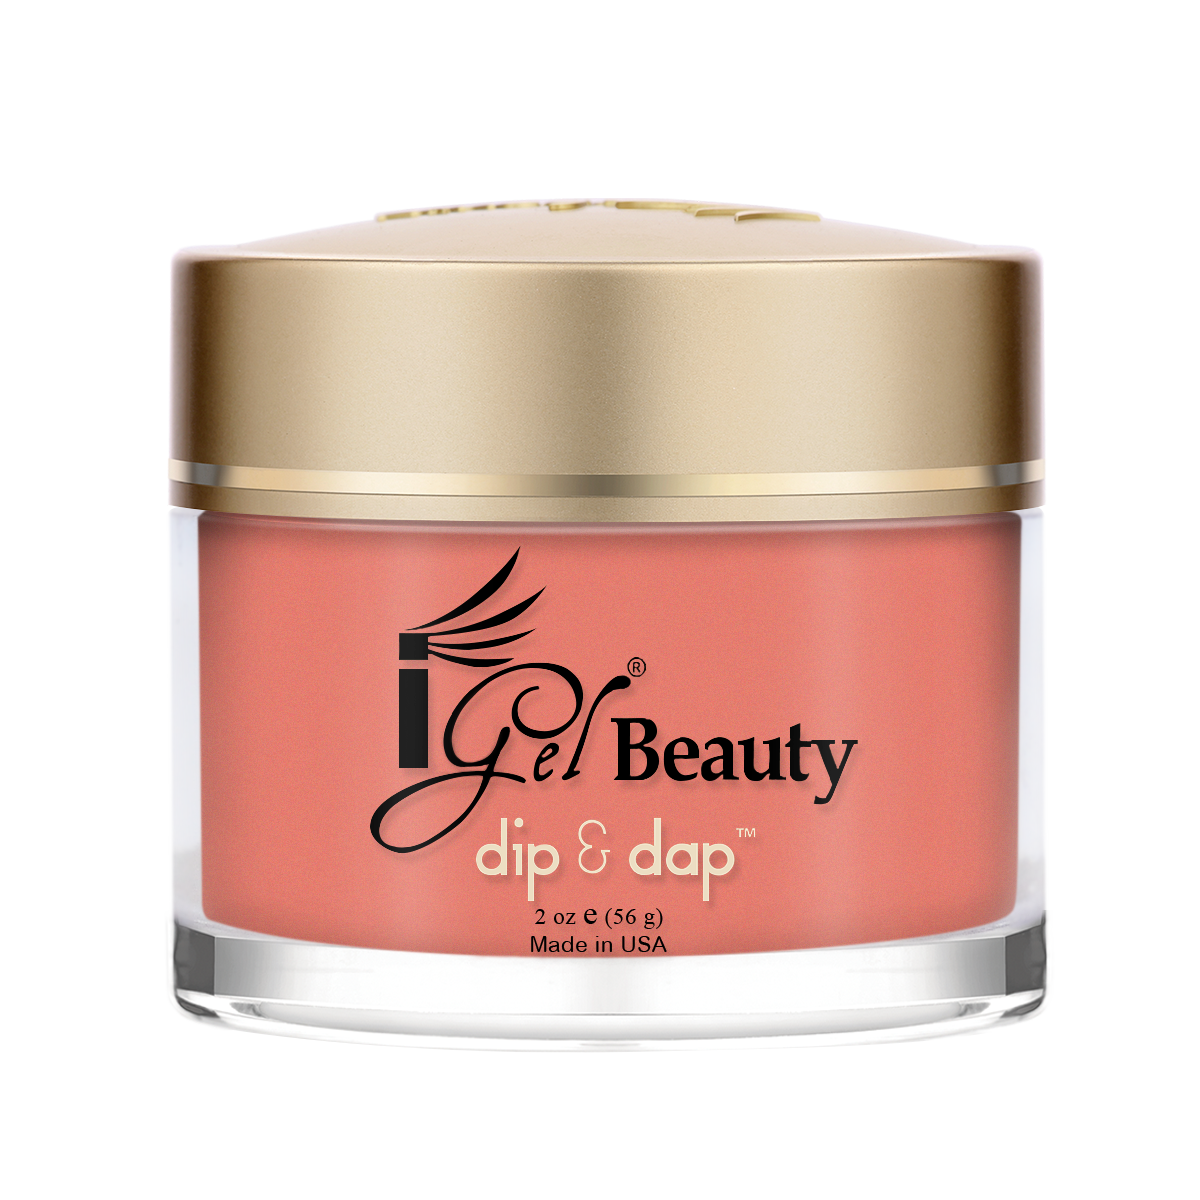 DD295 I'm Yours Dip and Dap Powder 2oz By IGel Beauty